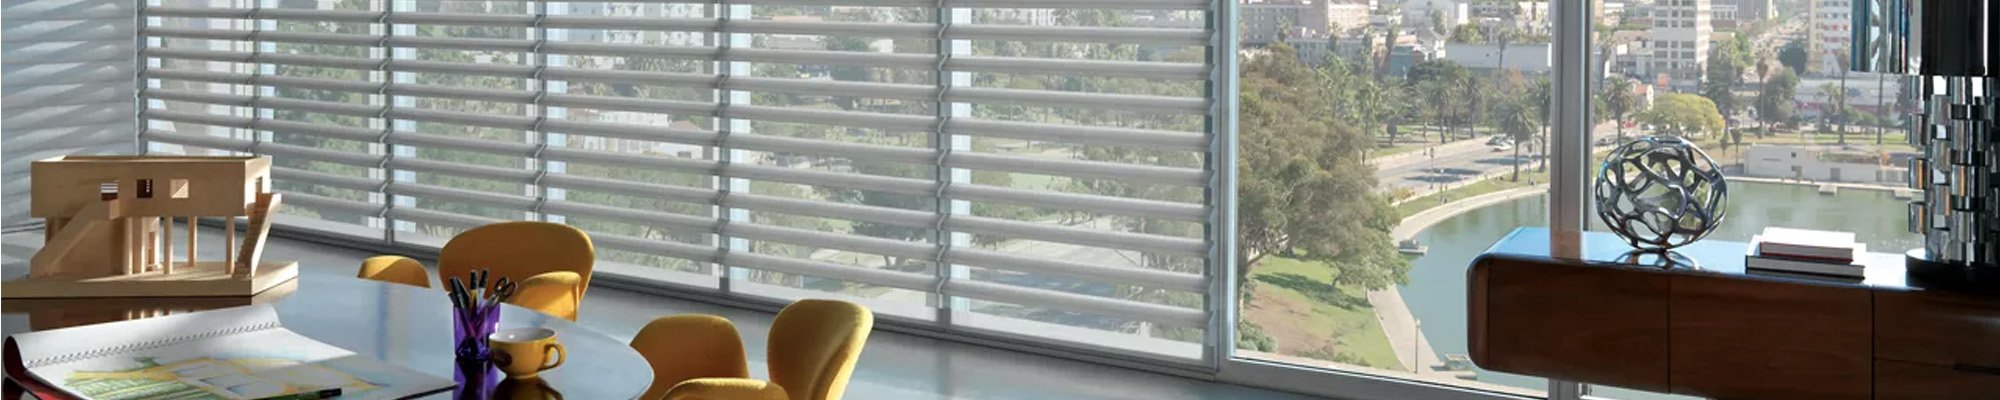 Commercial Window Treatments offered by Solutions via Mecho Systems and Graber